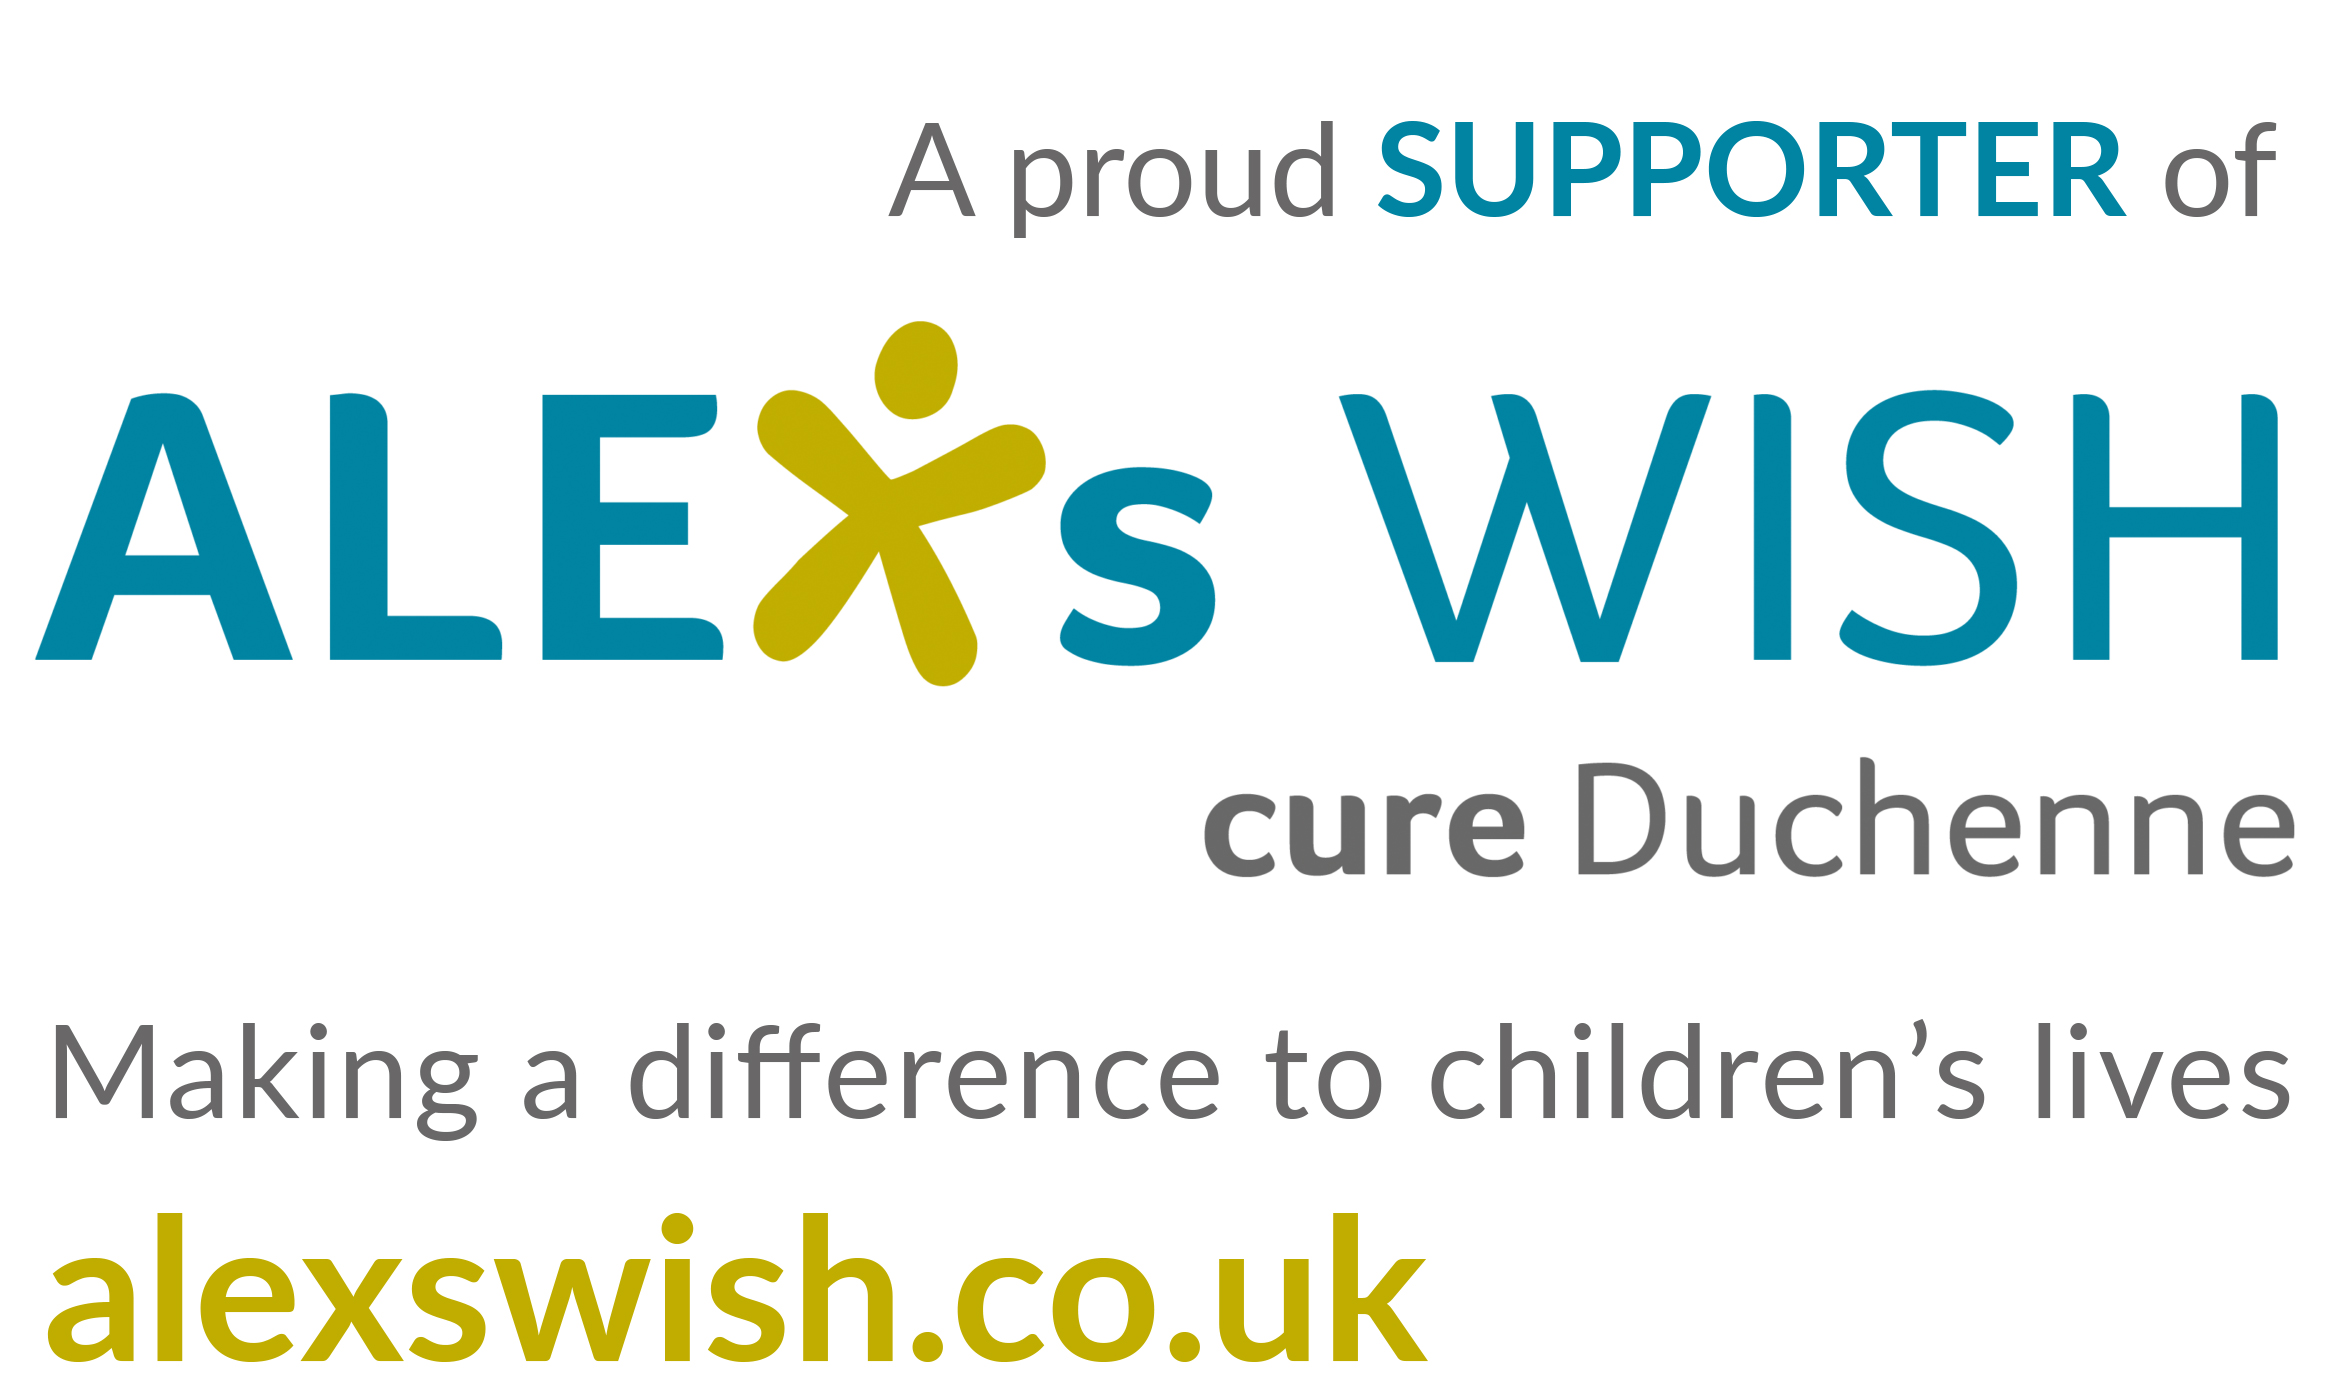 A proud supporter of Alex's Wish